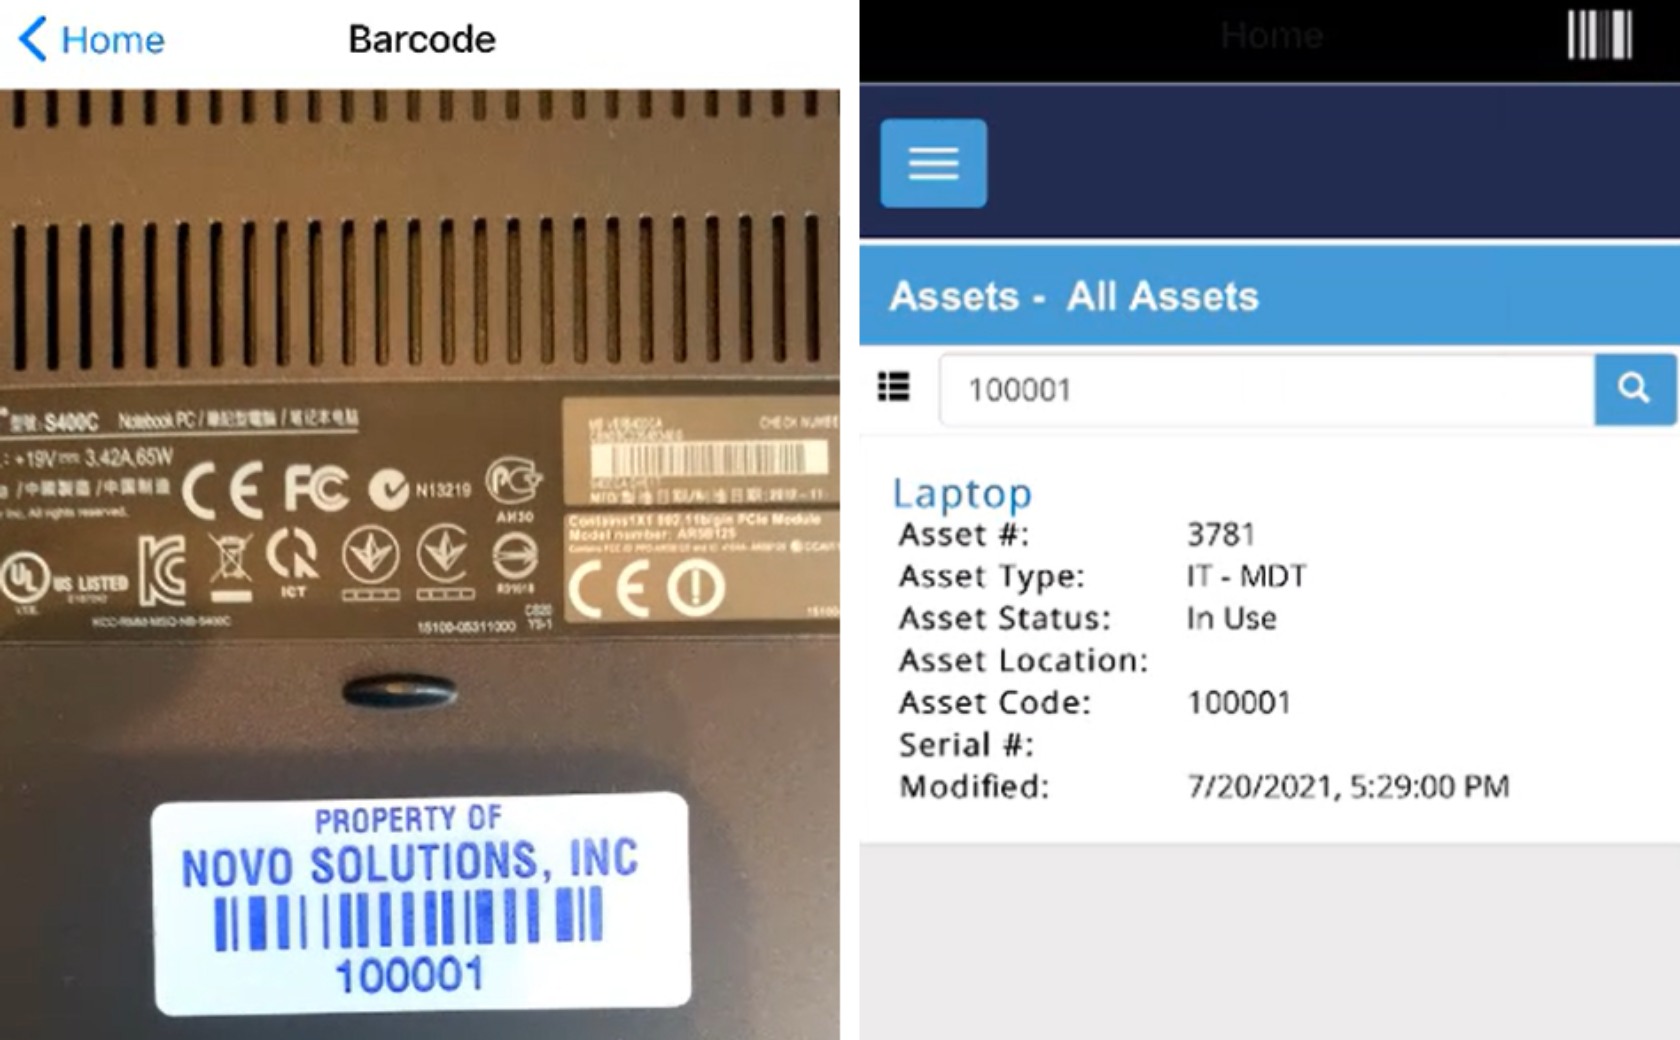 Asset Management with Barcode Scanning